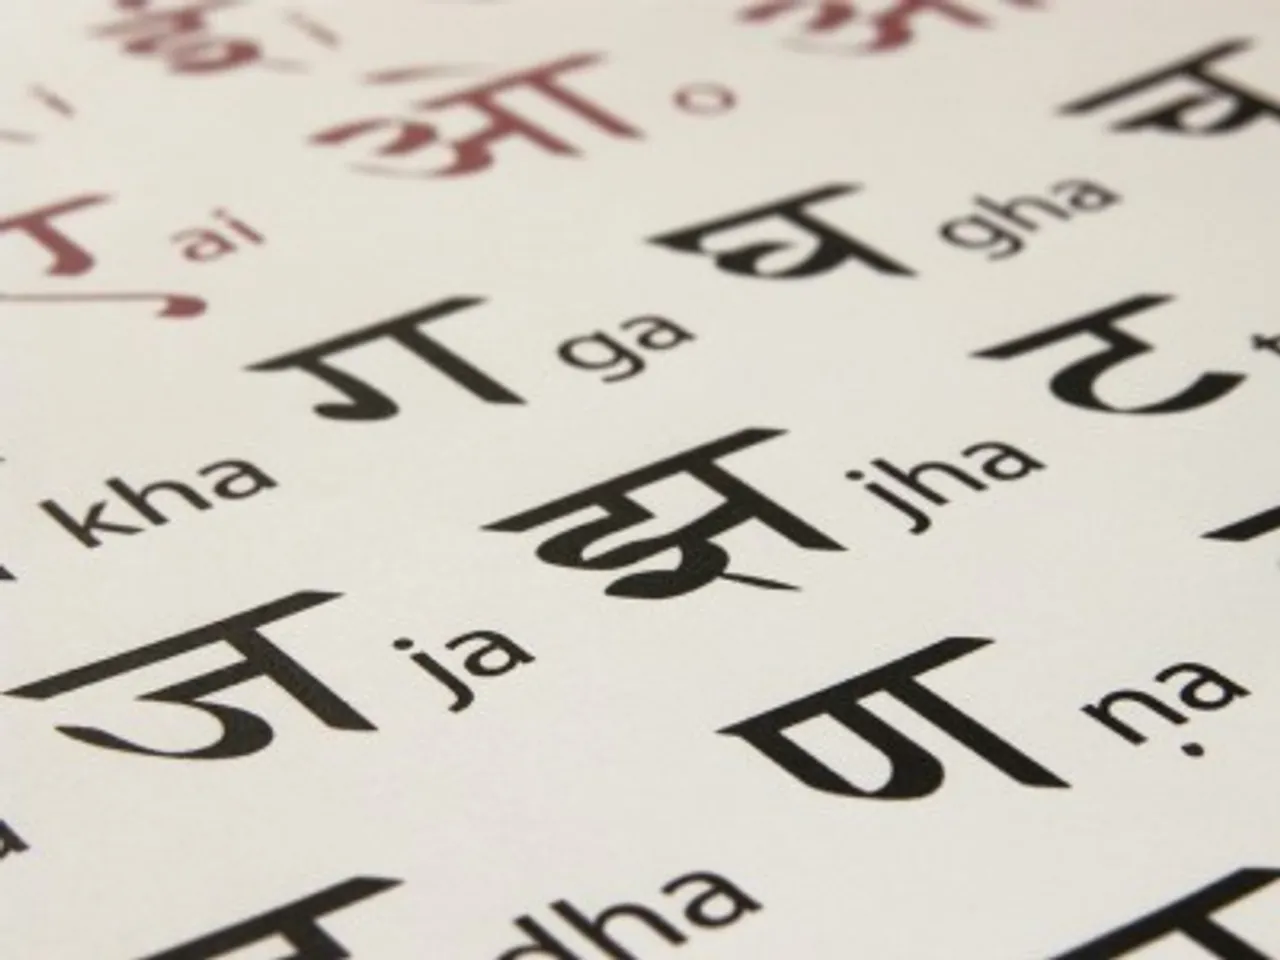 Hindi language safe to communicate crucial data; reports Trend Micro 2015 Threat Report